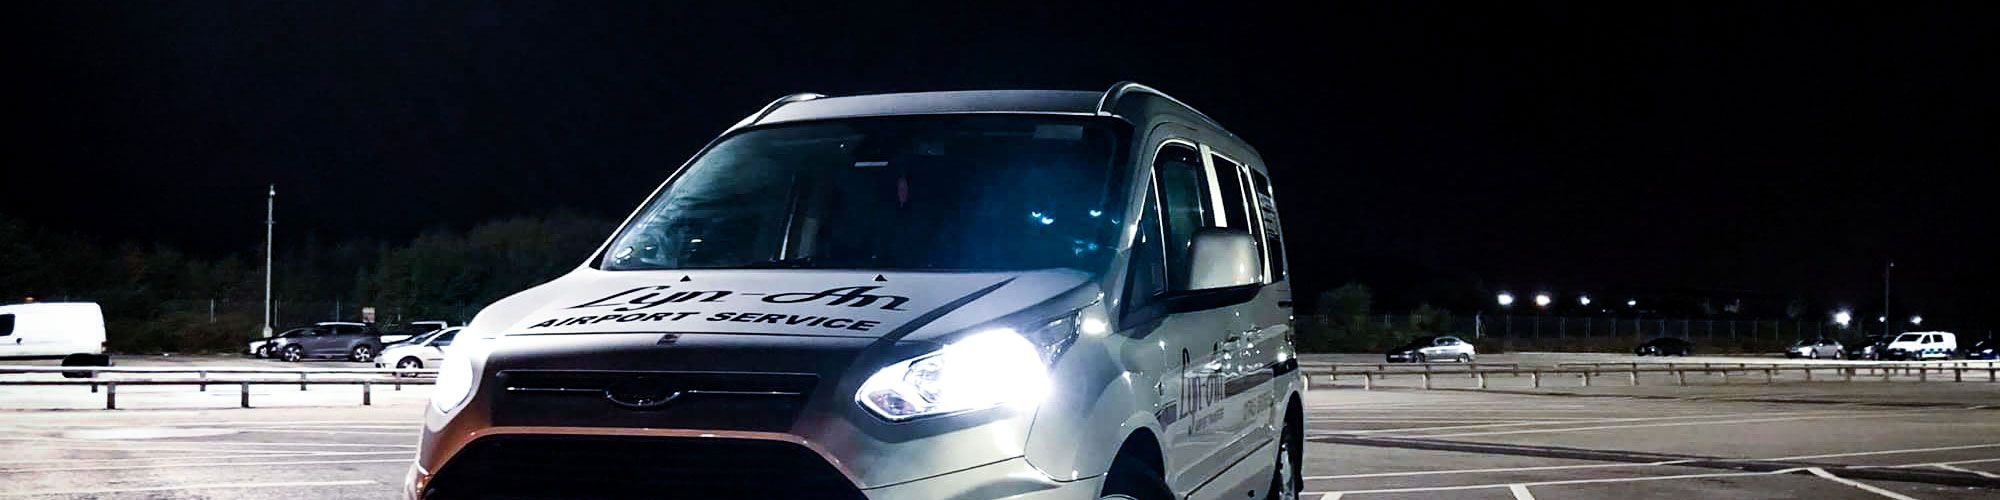 Lyn-An Airport Transfers minibus in car park at night